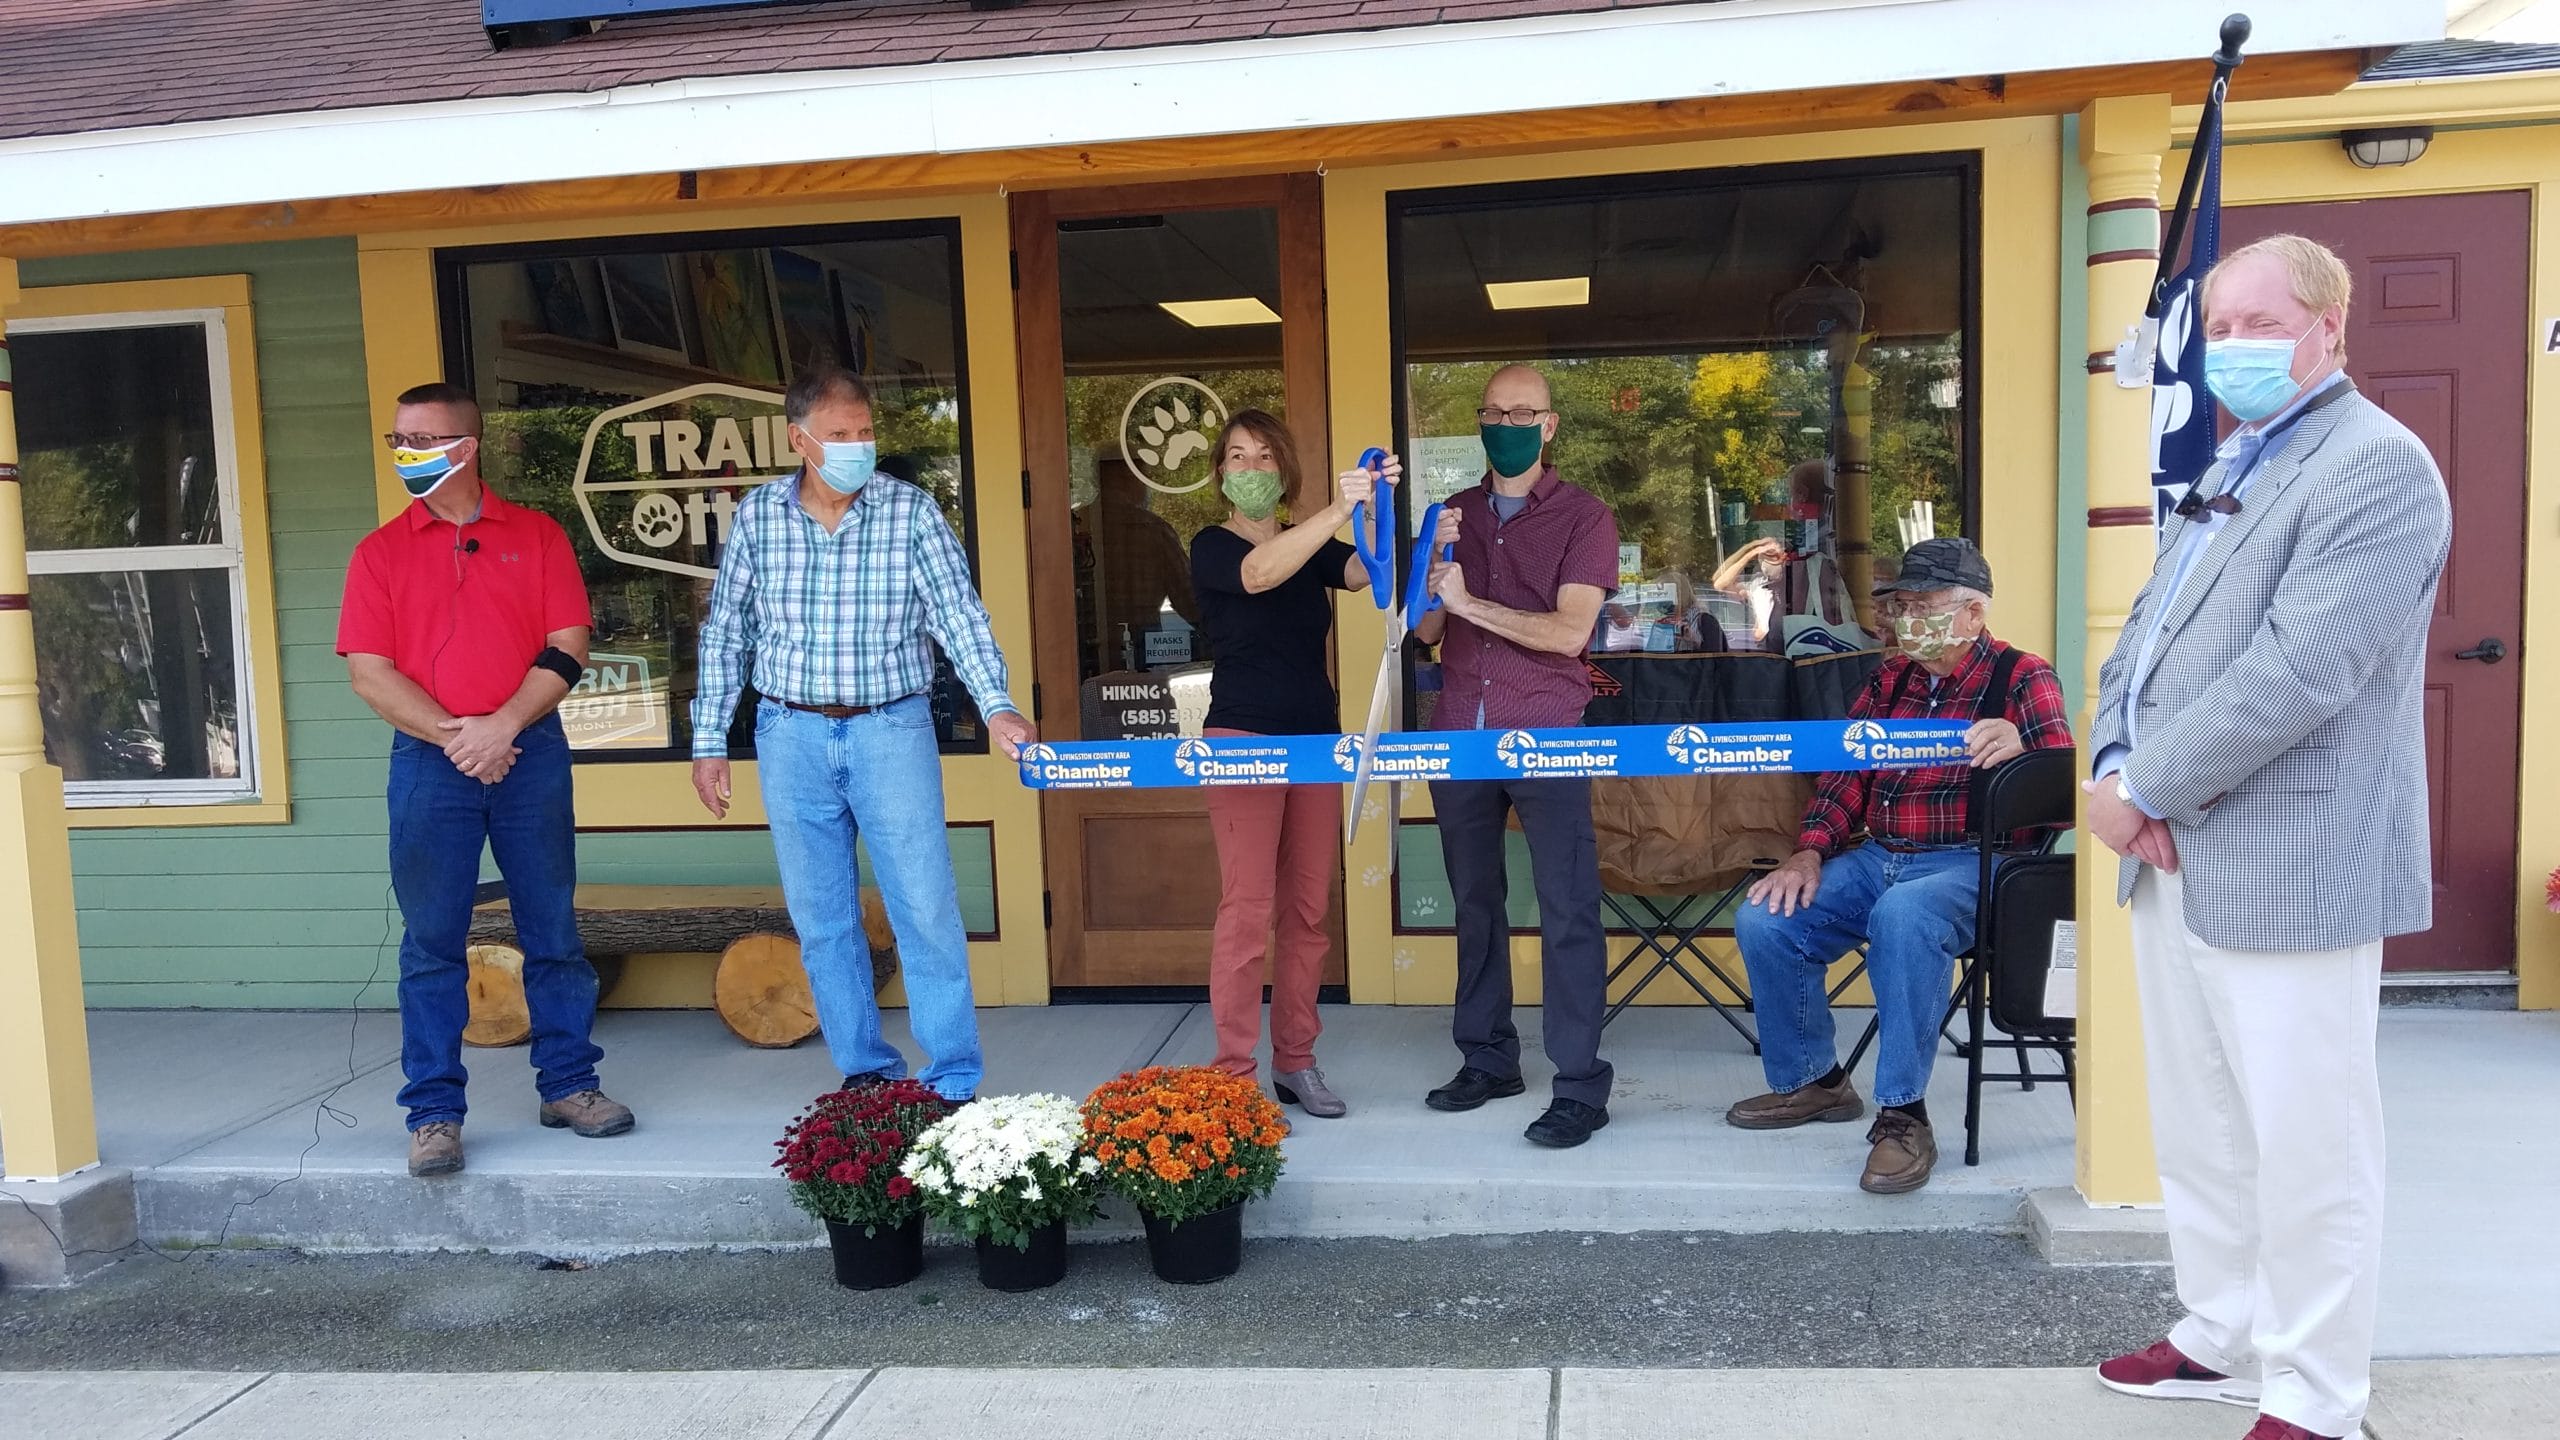 Trail Otter Grand Opening, 2 of 3